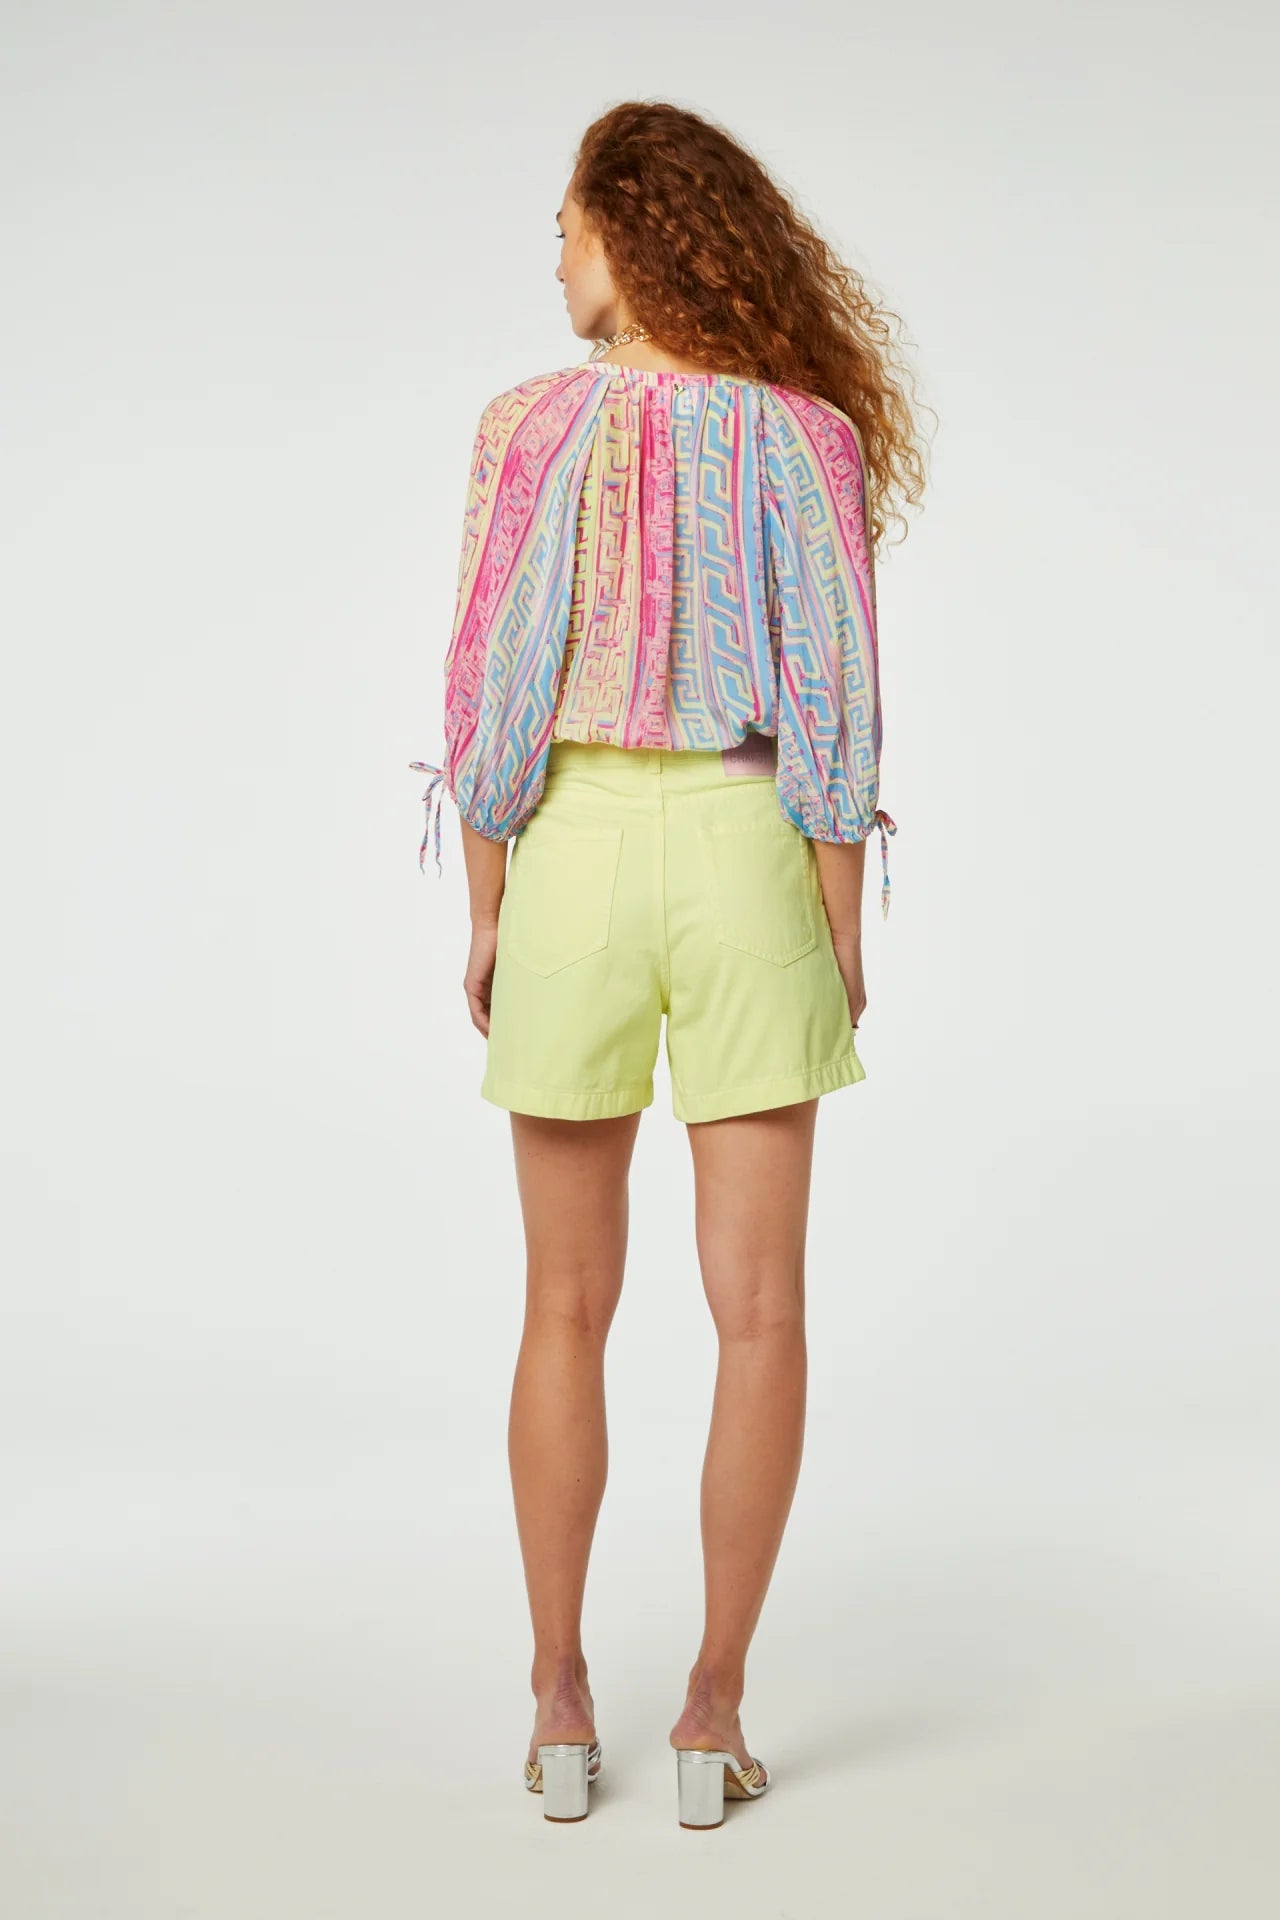 A woman stands with her back to the camera, wearing a colorful patterned blouse and Limoncello Foster shorts by Fabienne Chapot in a bright yellow wash, paired with silver heels.